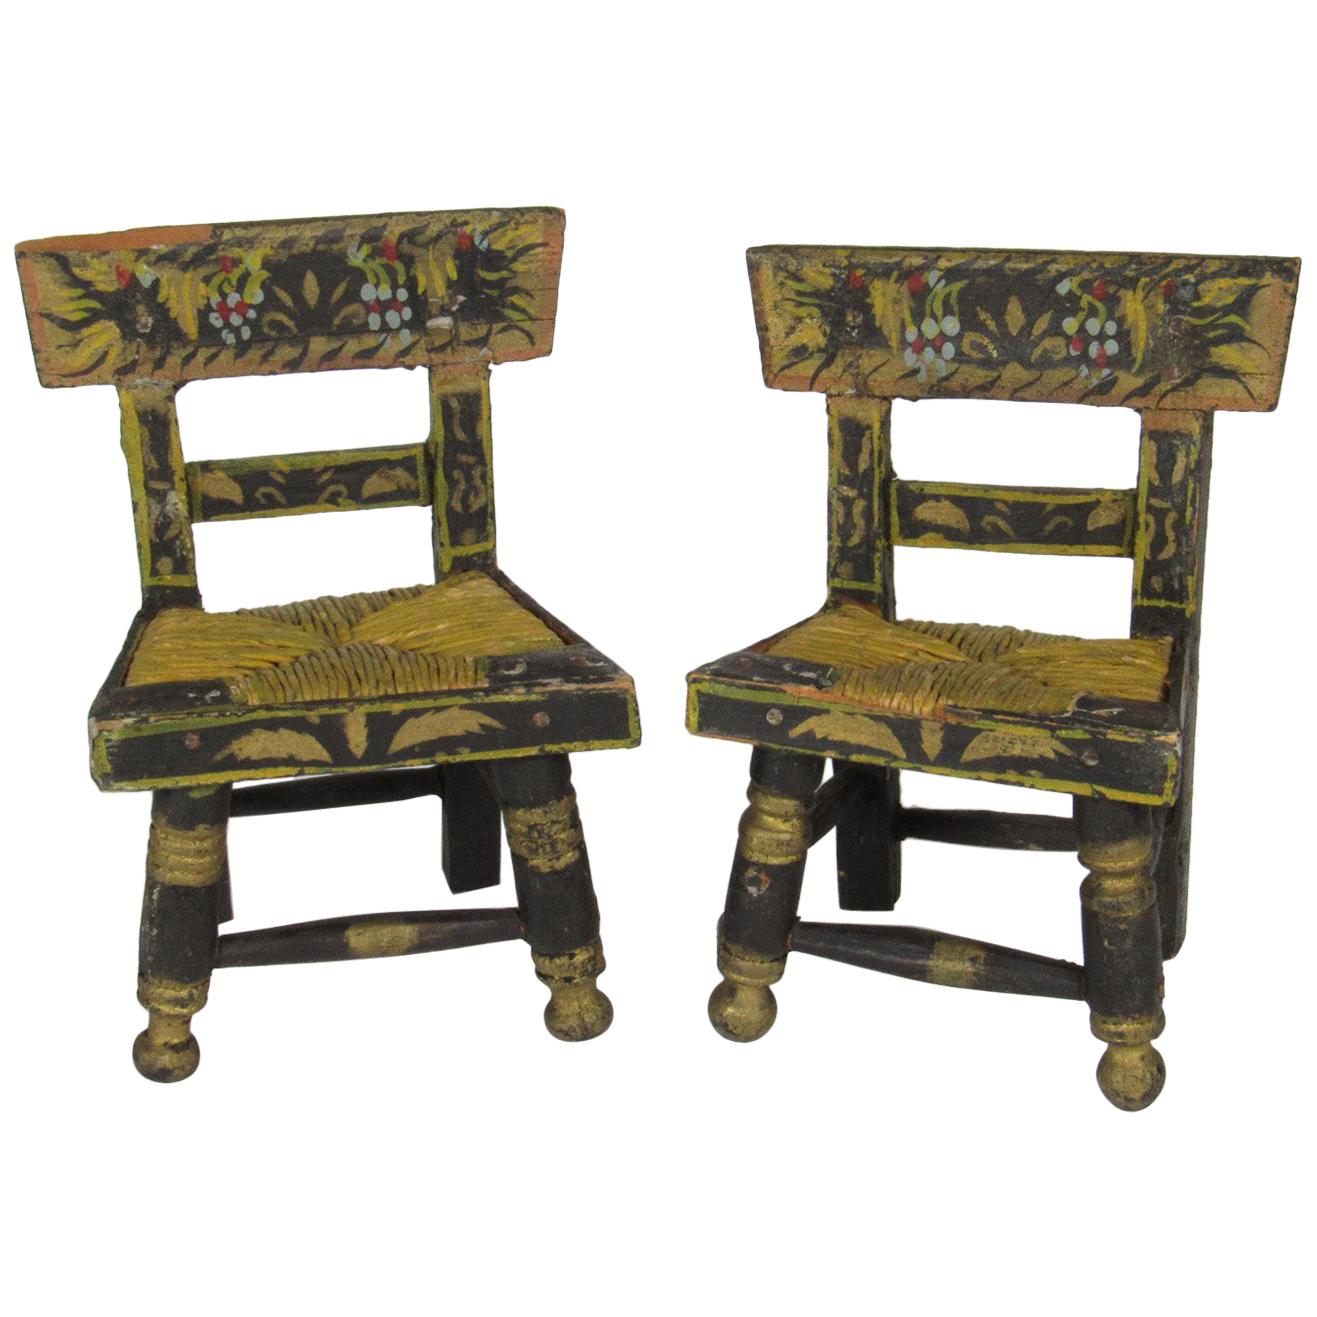 Pair of Antique Miniature Hand-Painted Folk Art Hitchcock Chairs